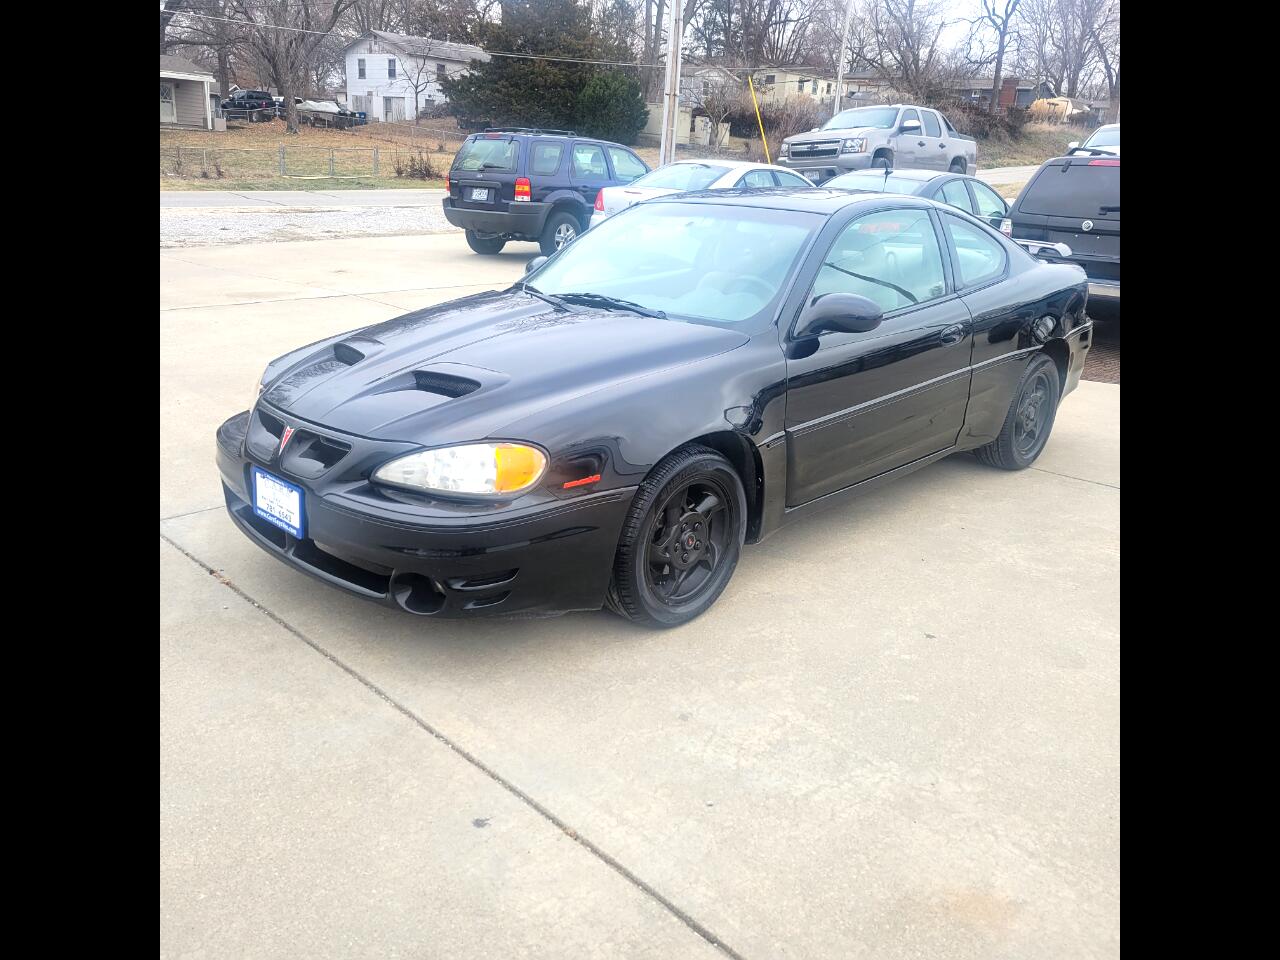 Used 2005 Pontiac Grand Am GT coupe for Sale in Liberty MO 64068 Cars Inc.